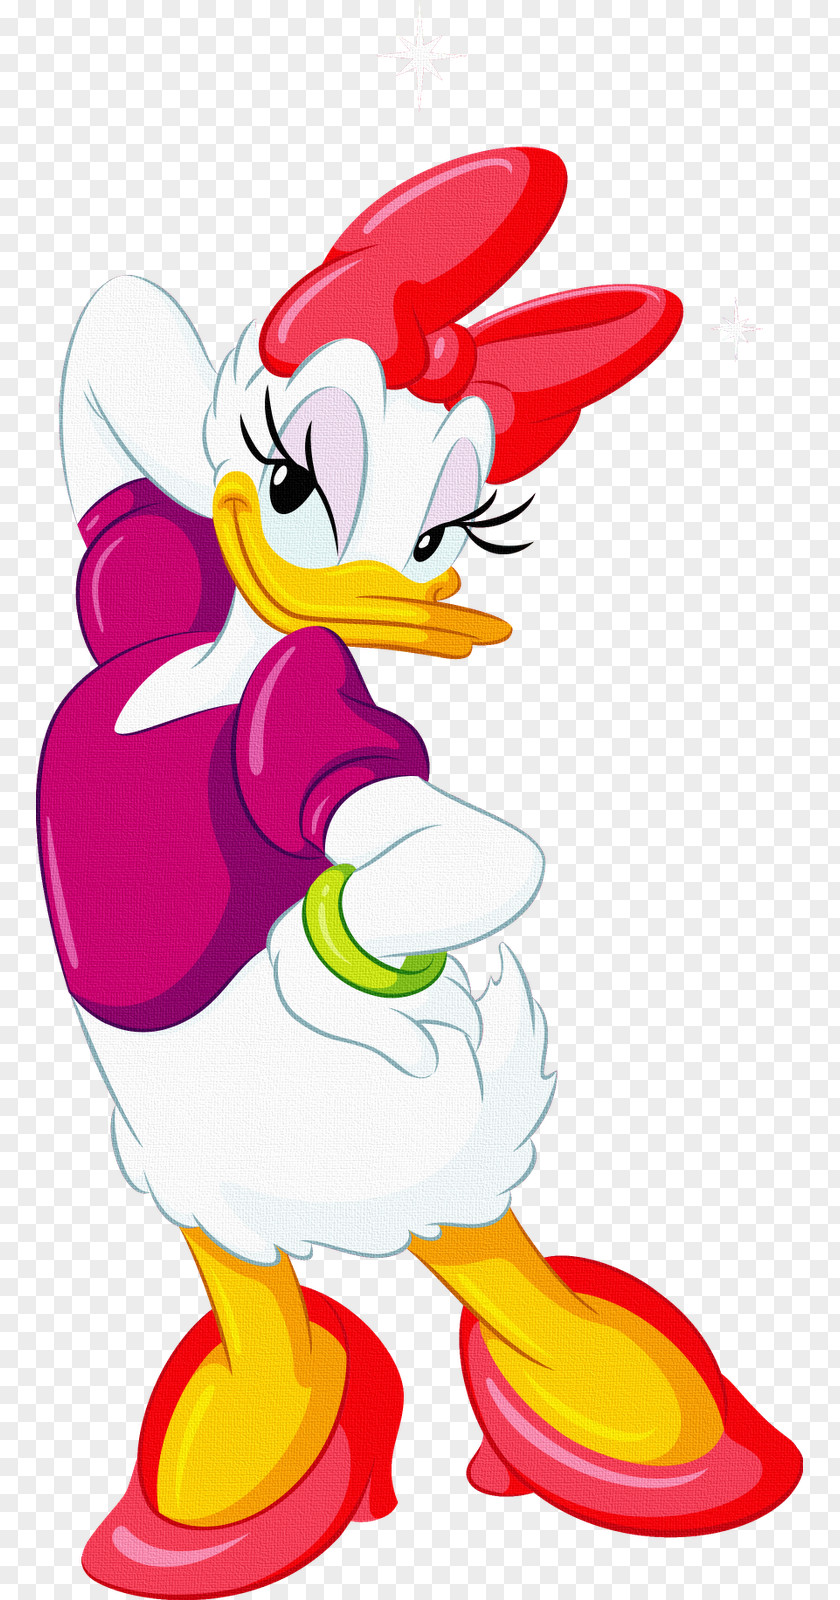 Disney Pluto Mickey Mouse Daisy Duck Minnie Donald PNG